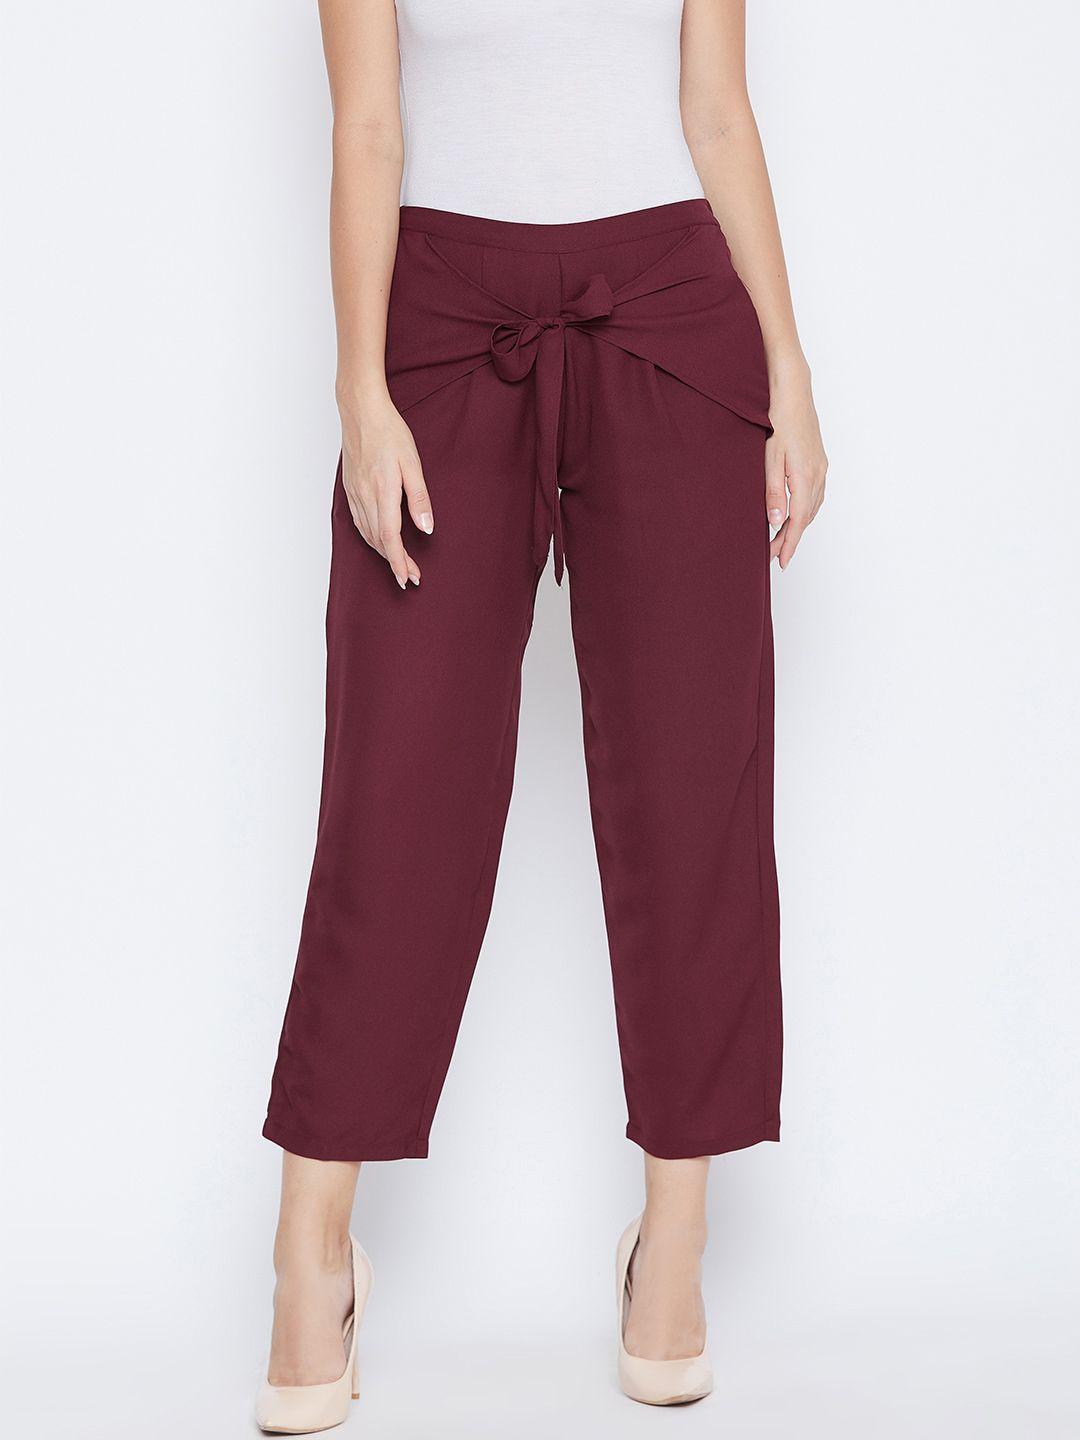 dodo & moa women maroon regular fit solid cropped trousers